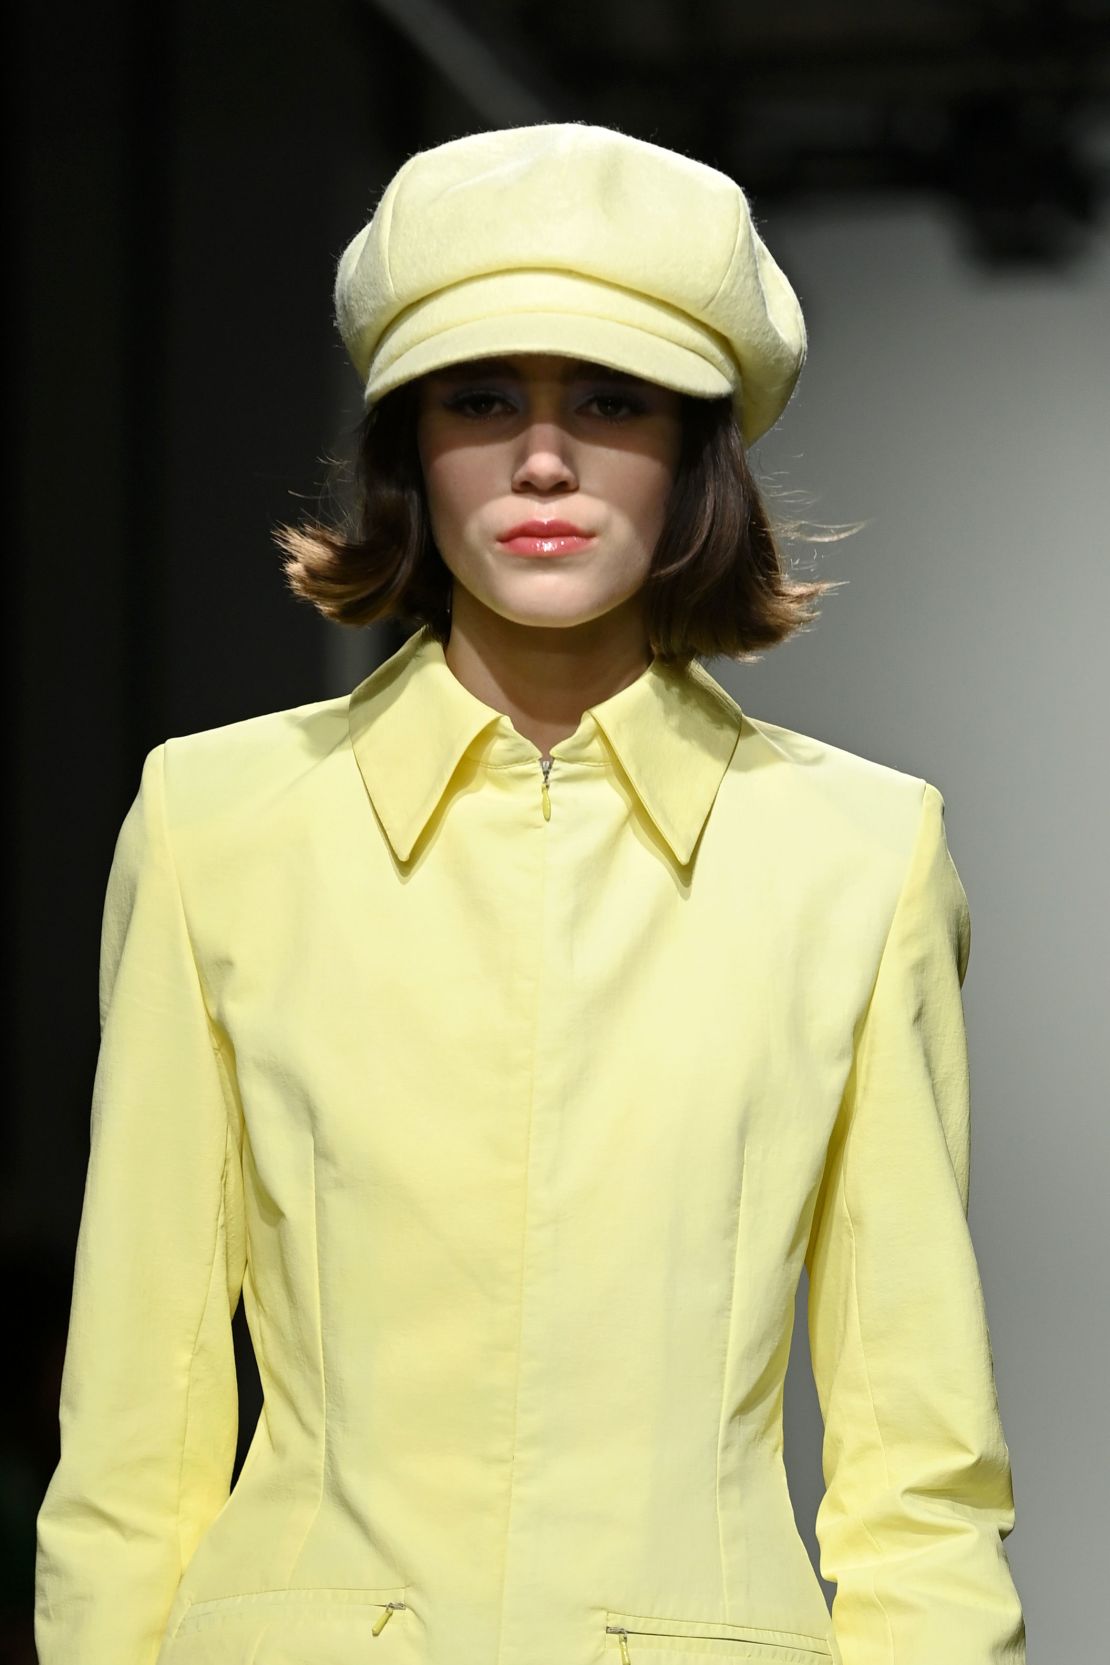 A buttercup yellow look from Connor Ive's latest collection.